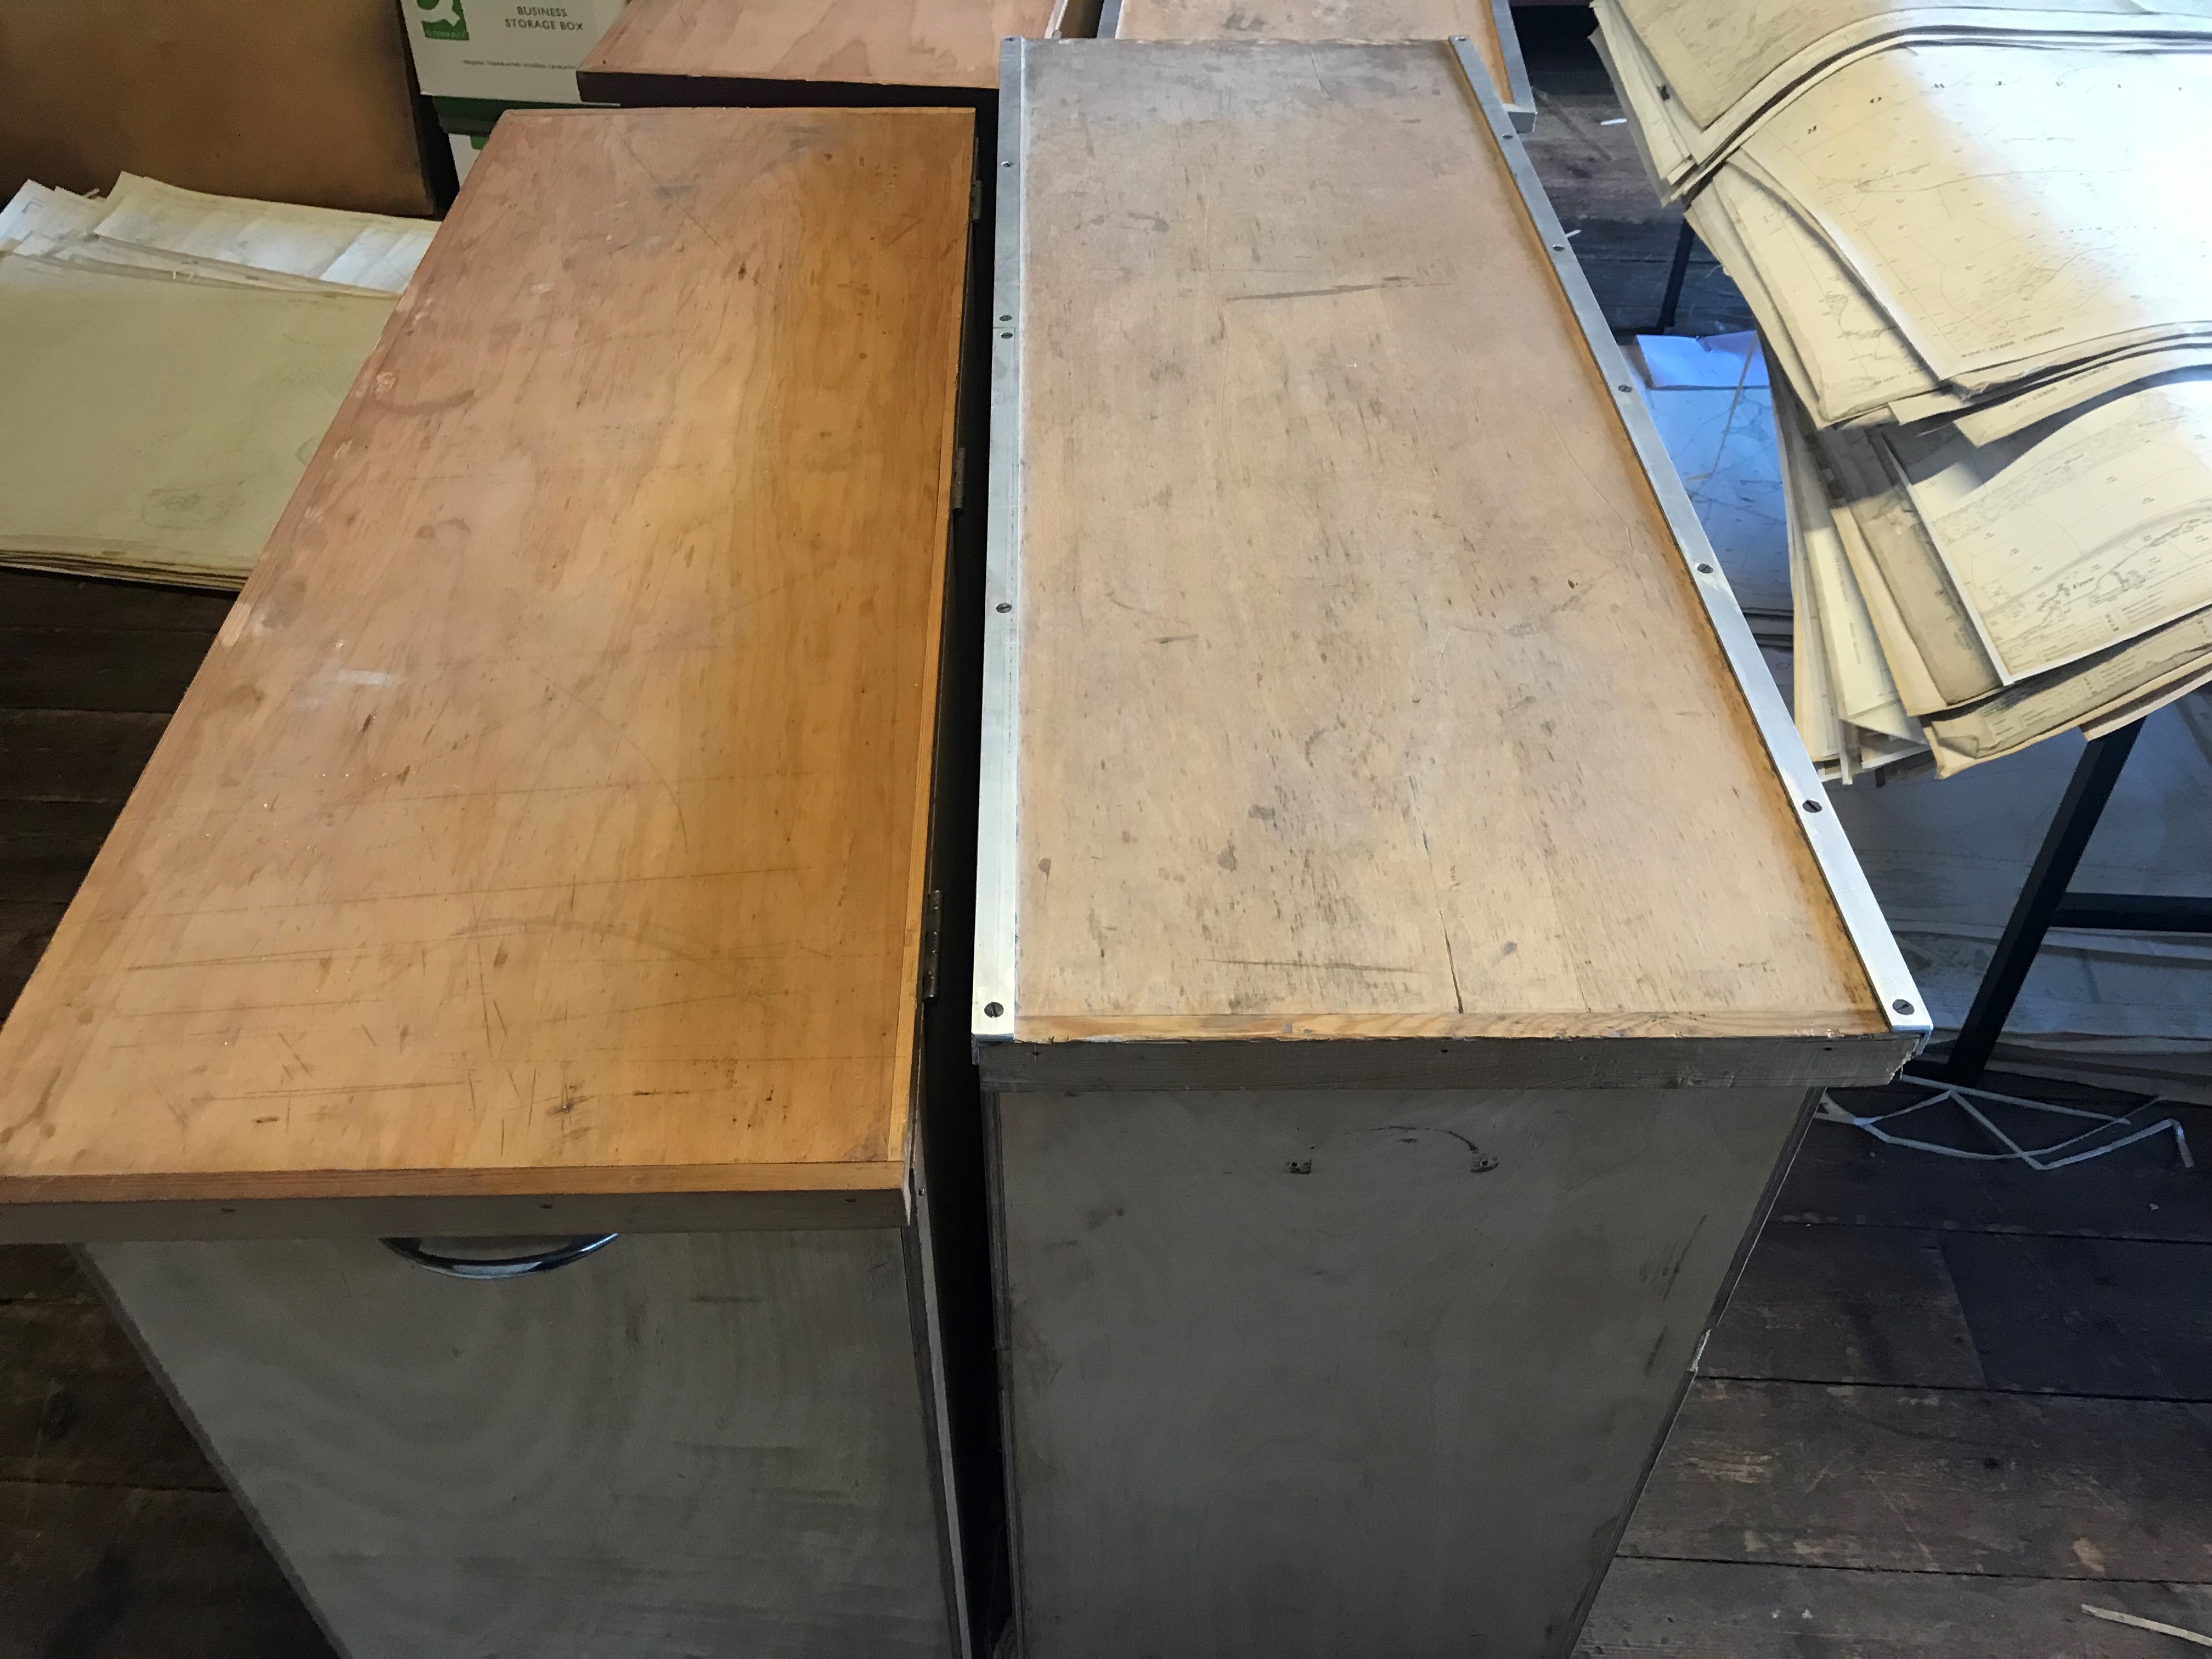 TWO UPRIGHT PLAN CHESTS each with adjustable dividers inside